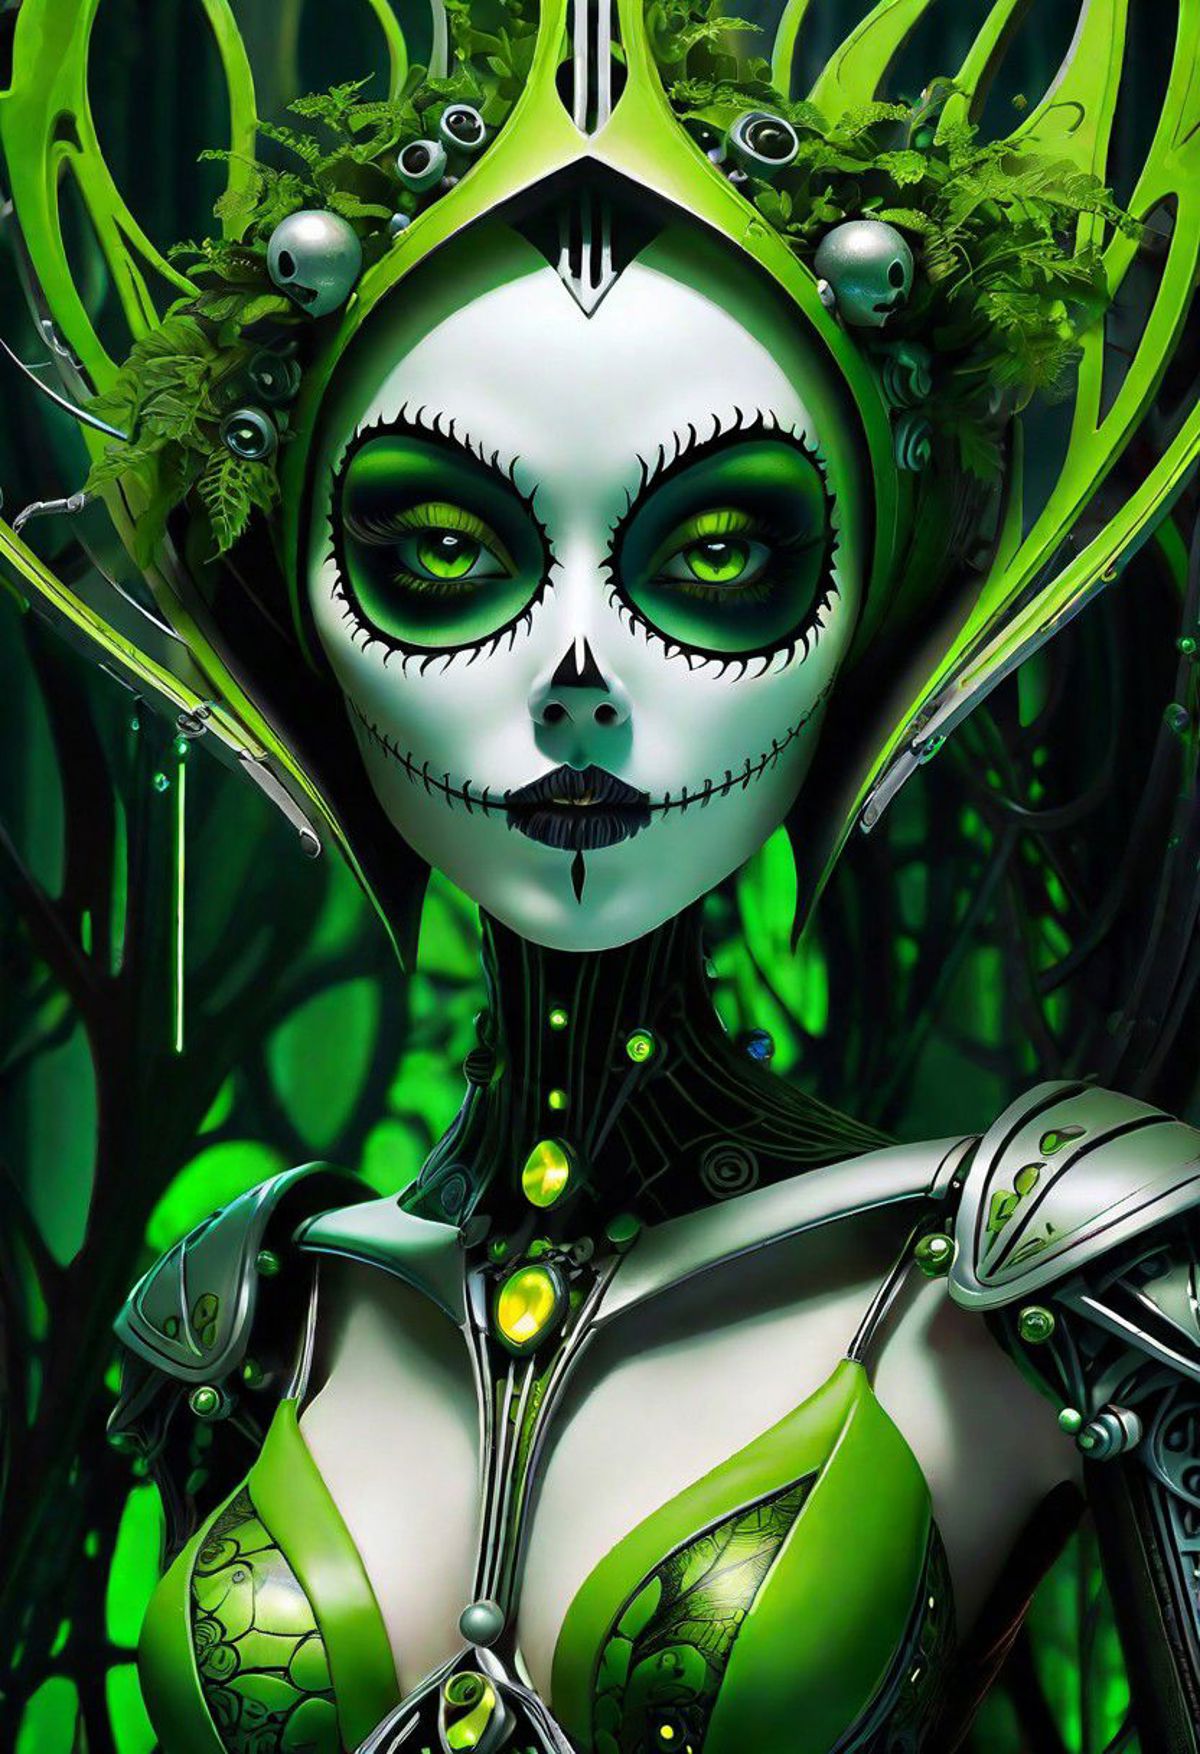 A scary green and white skeleton makeup on a woman's face.